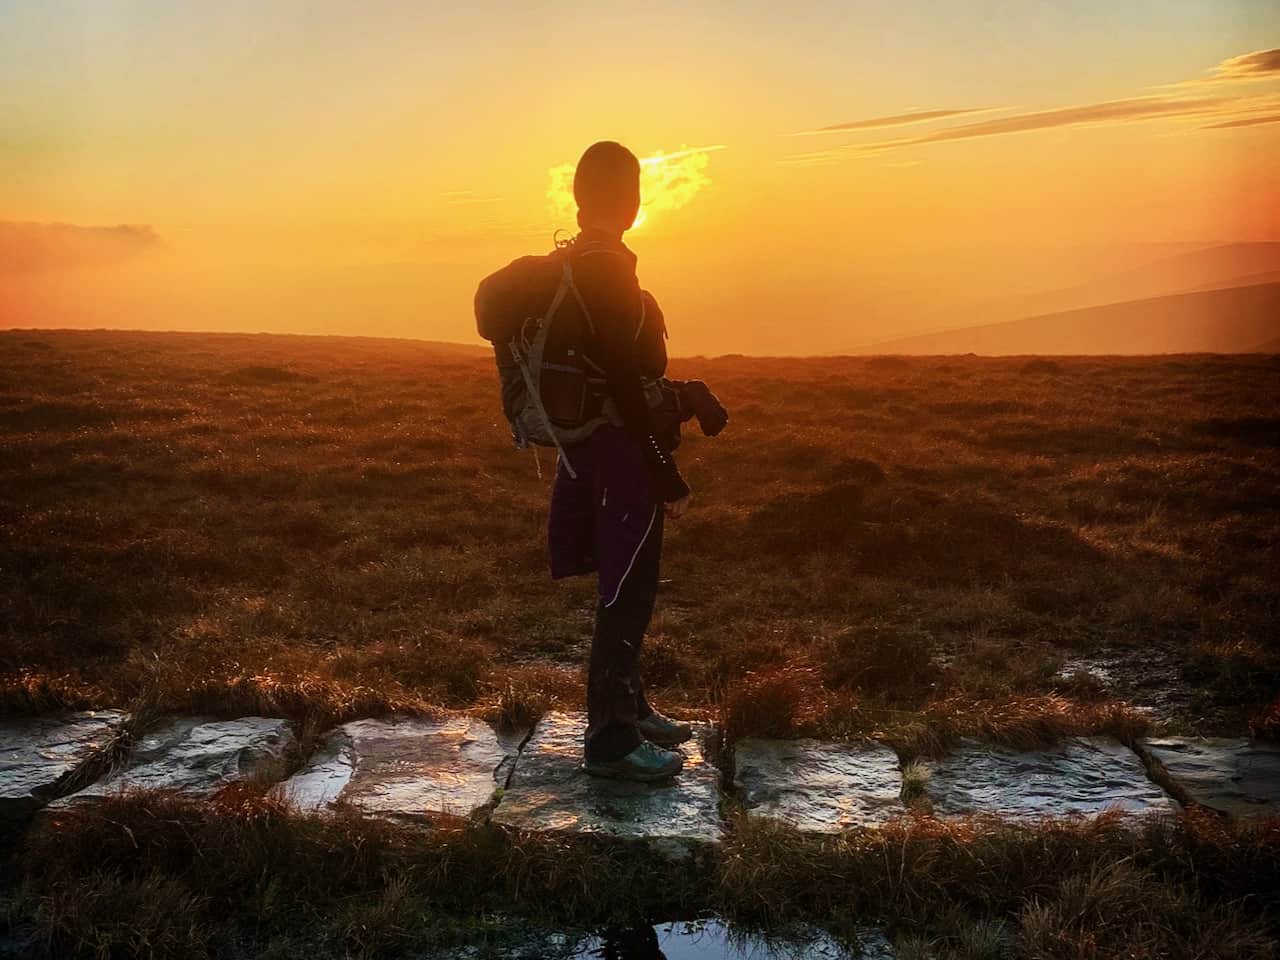 A lady stares into the sunset on a Lowland Leader Award training course in the Peak District